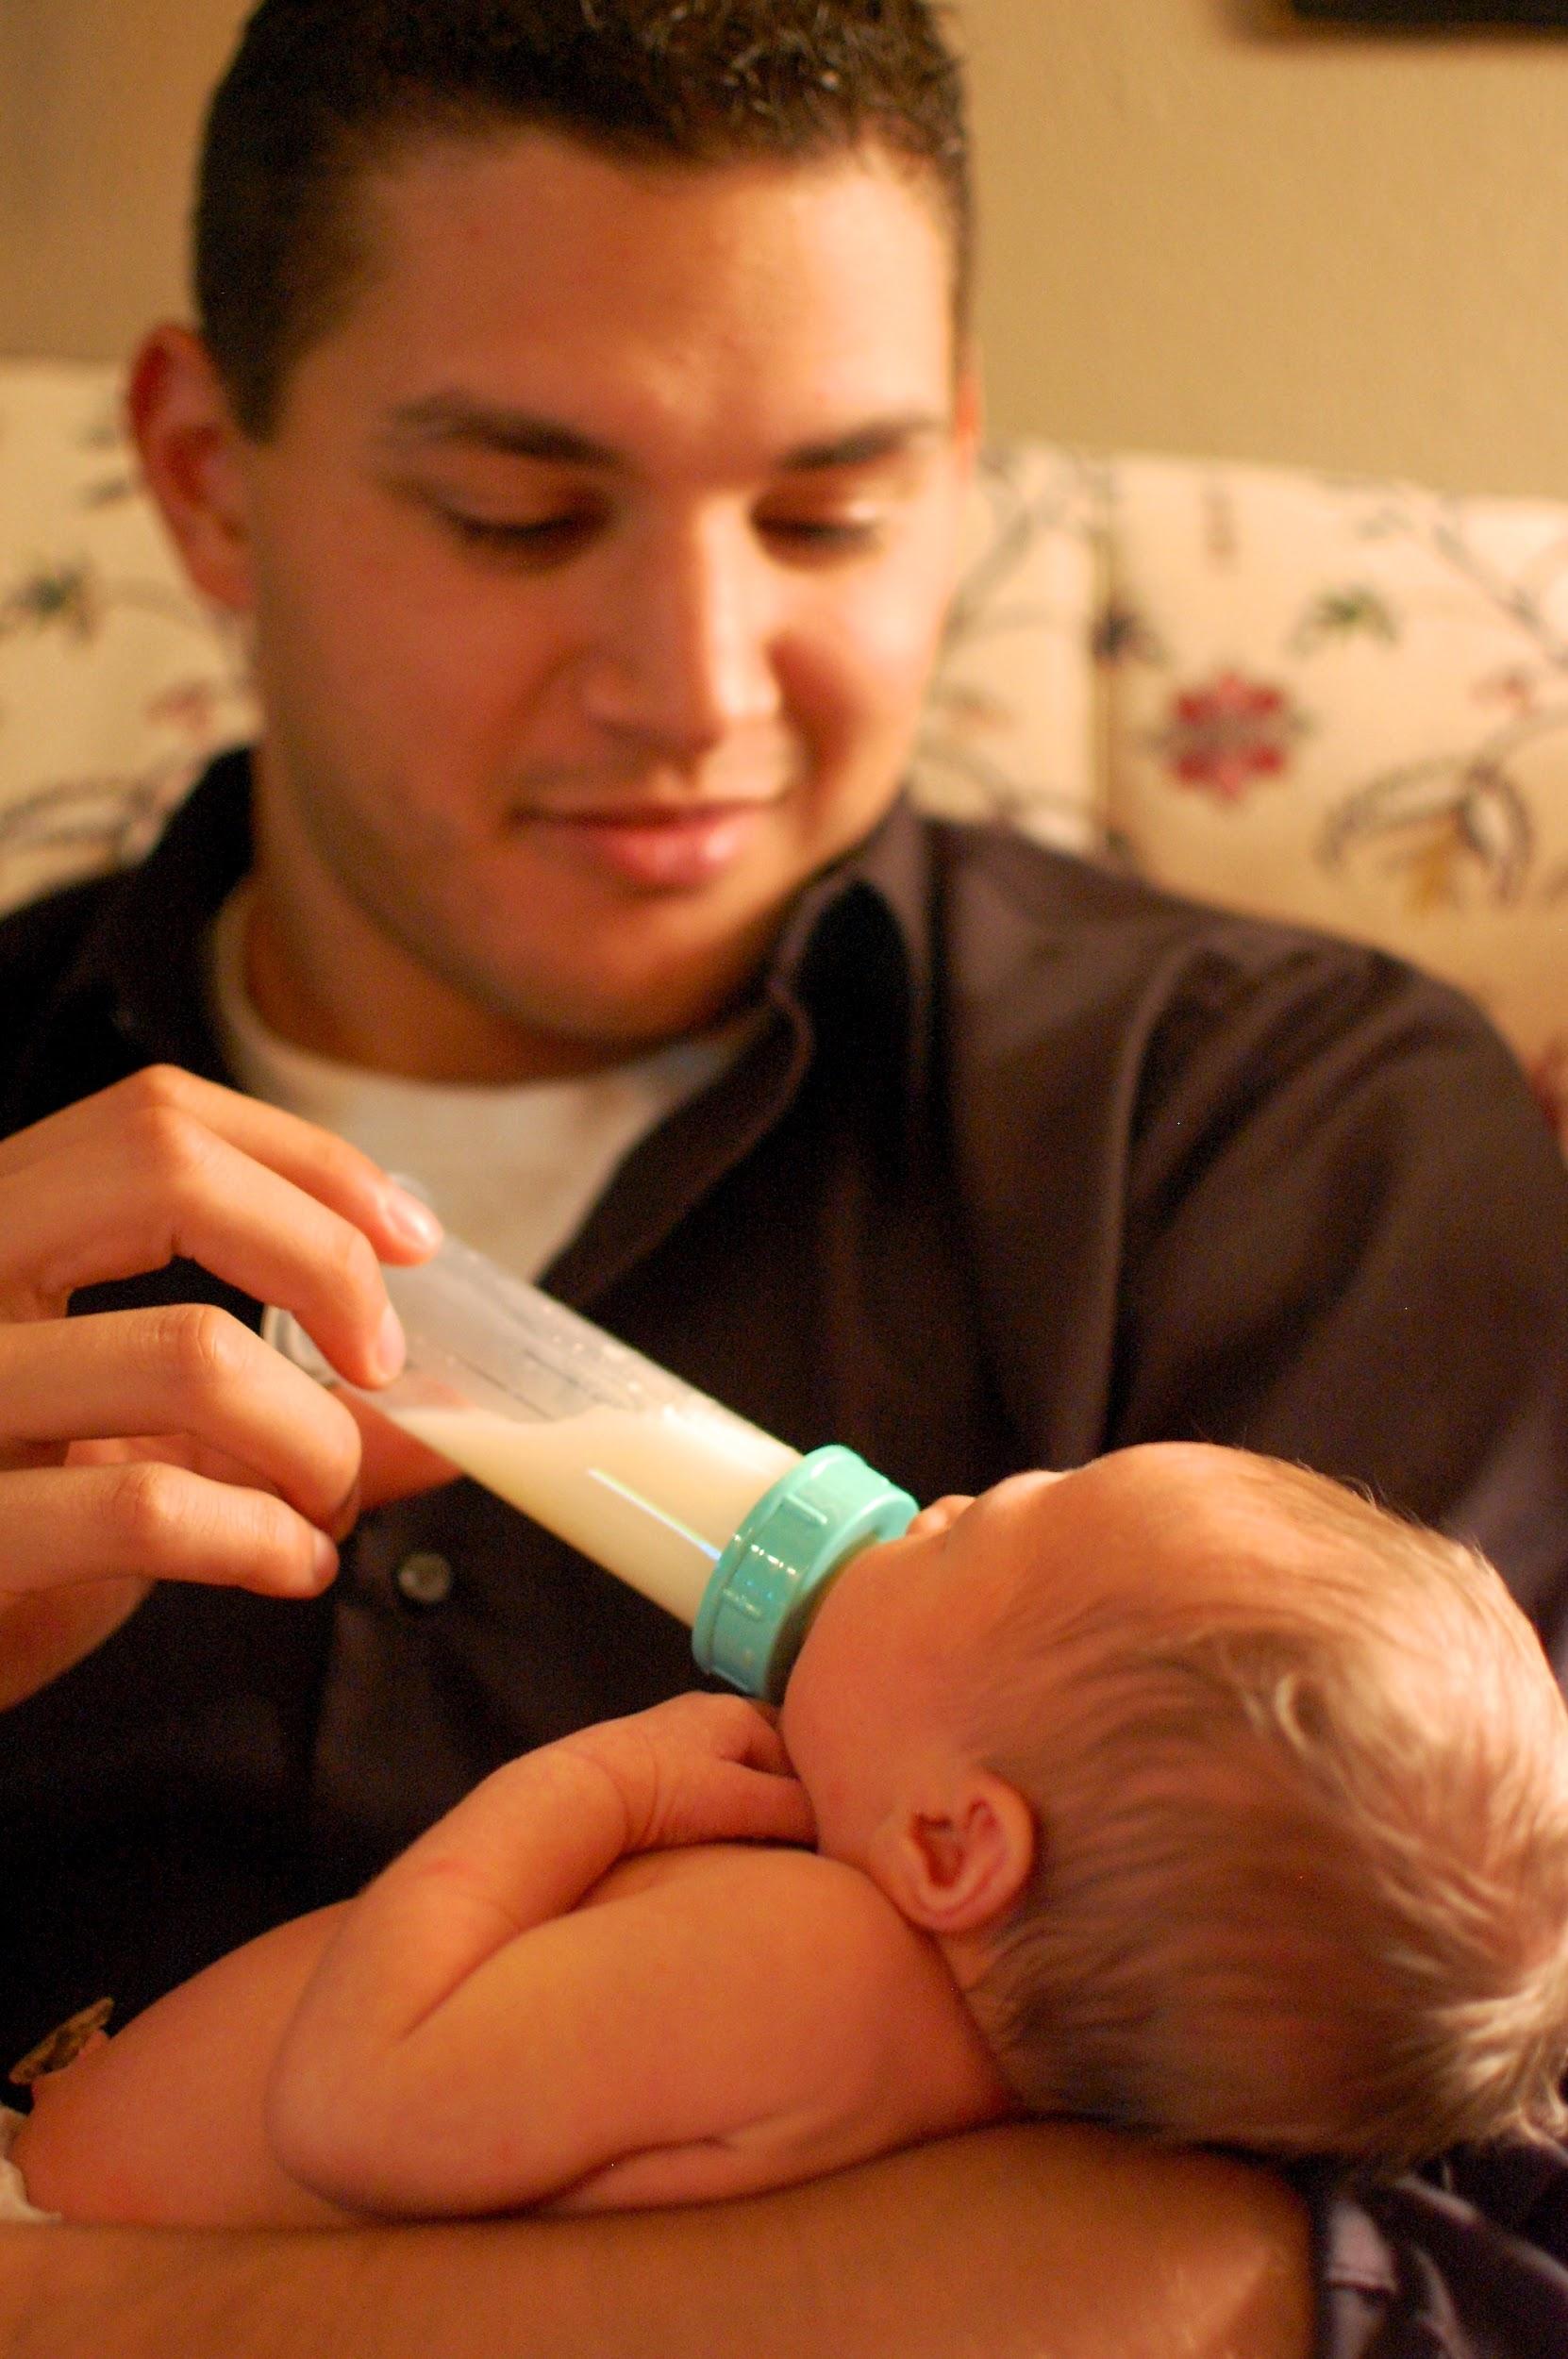 A father with medium skin tone and dark hair bottle-feeds a newborn infant. The father is smiling and gazing at the baby.